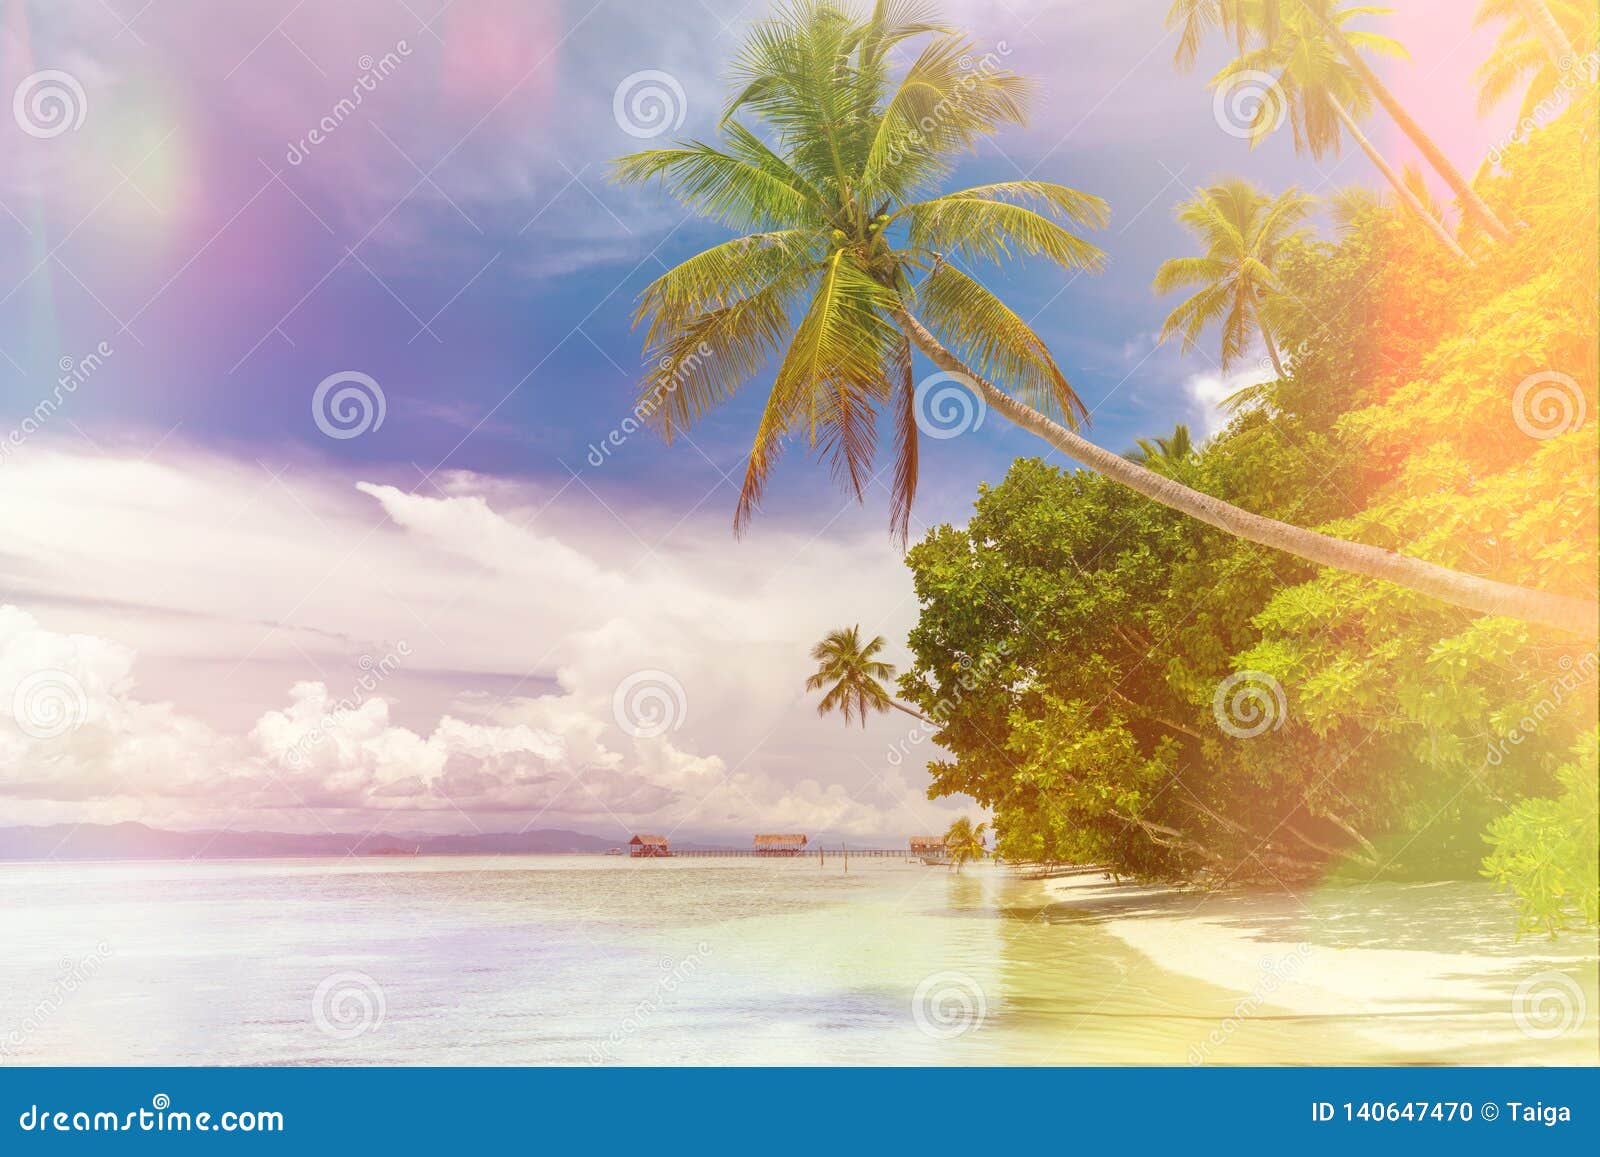 Background Of Paradise Island Landscape Of Tropical Beach Calm